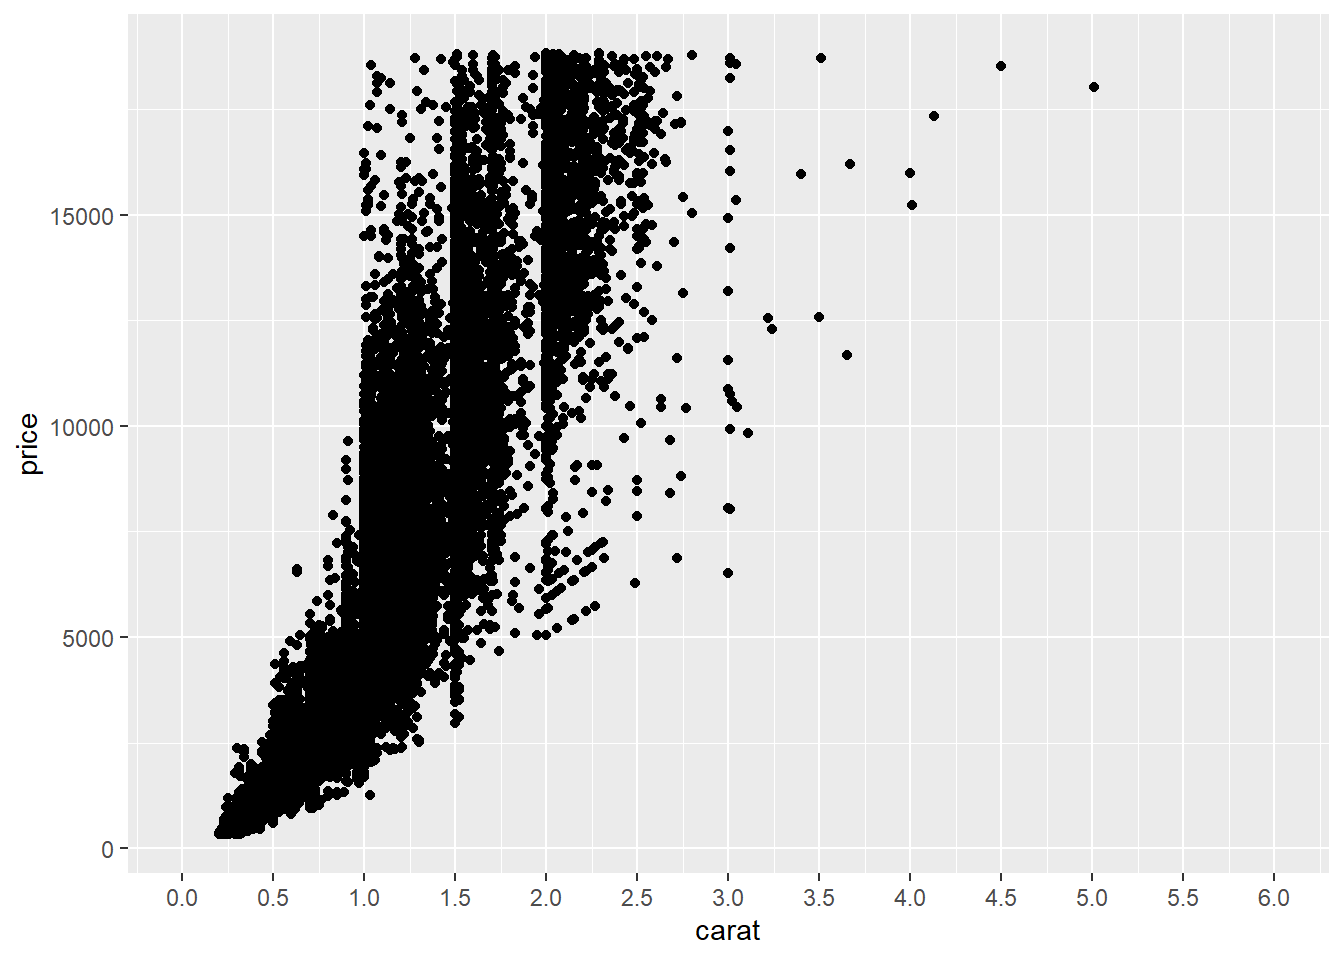 A ggplot object with a geom_point layer, the price of diamonds by their carat, x axis changed